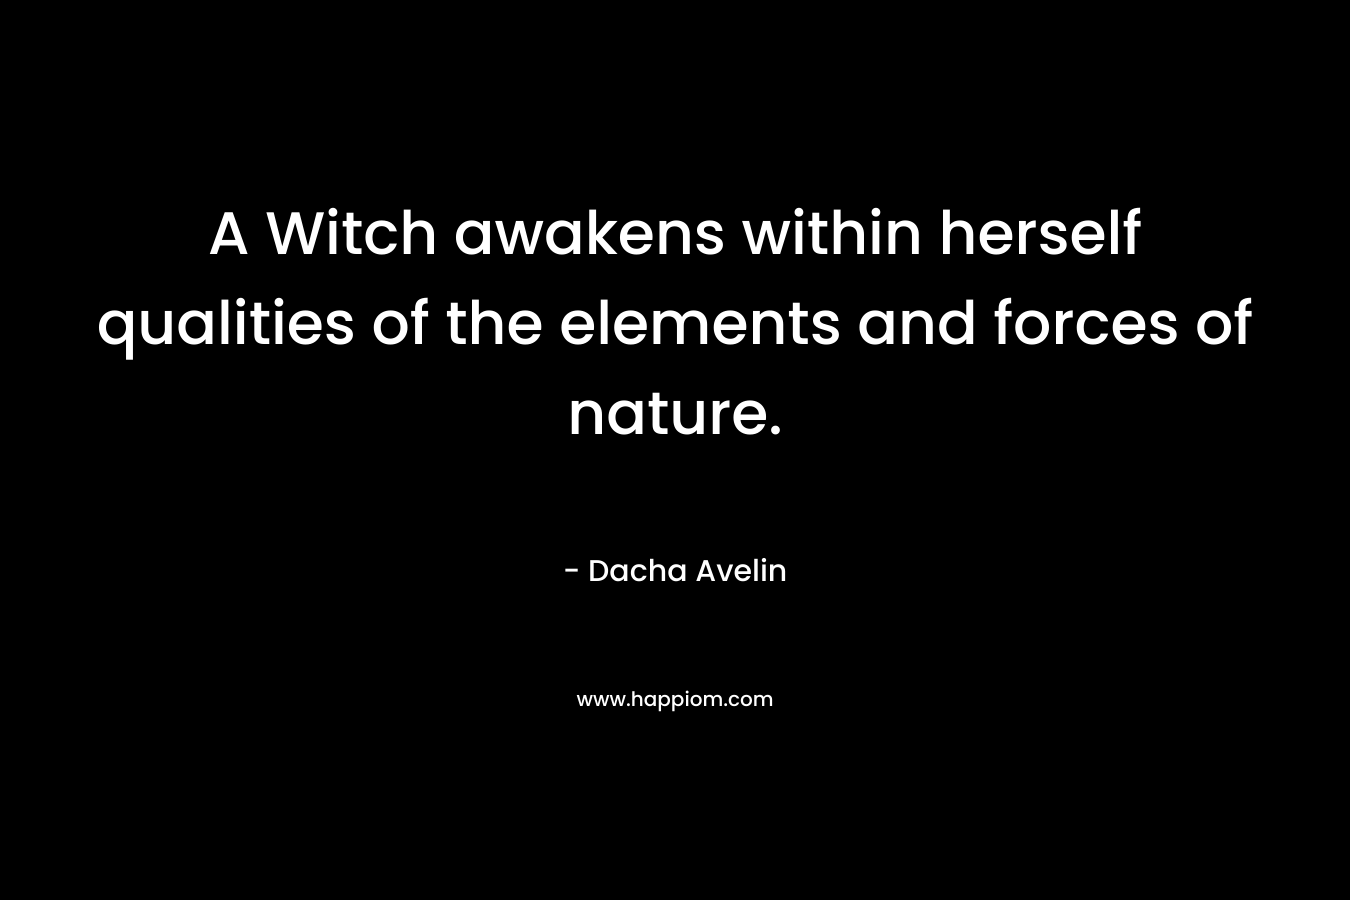 A Witch awakens within herself qualities of the elements and forces of nature.